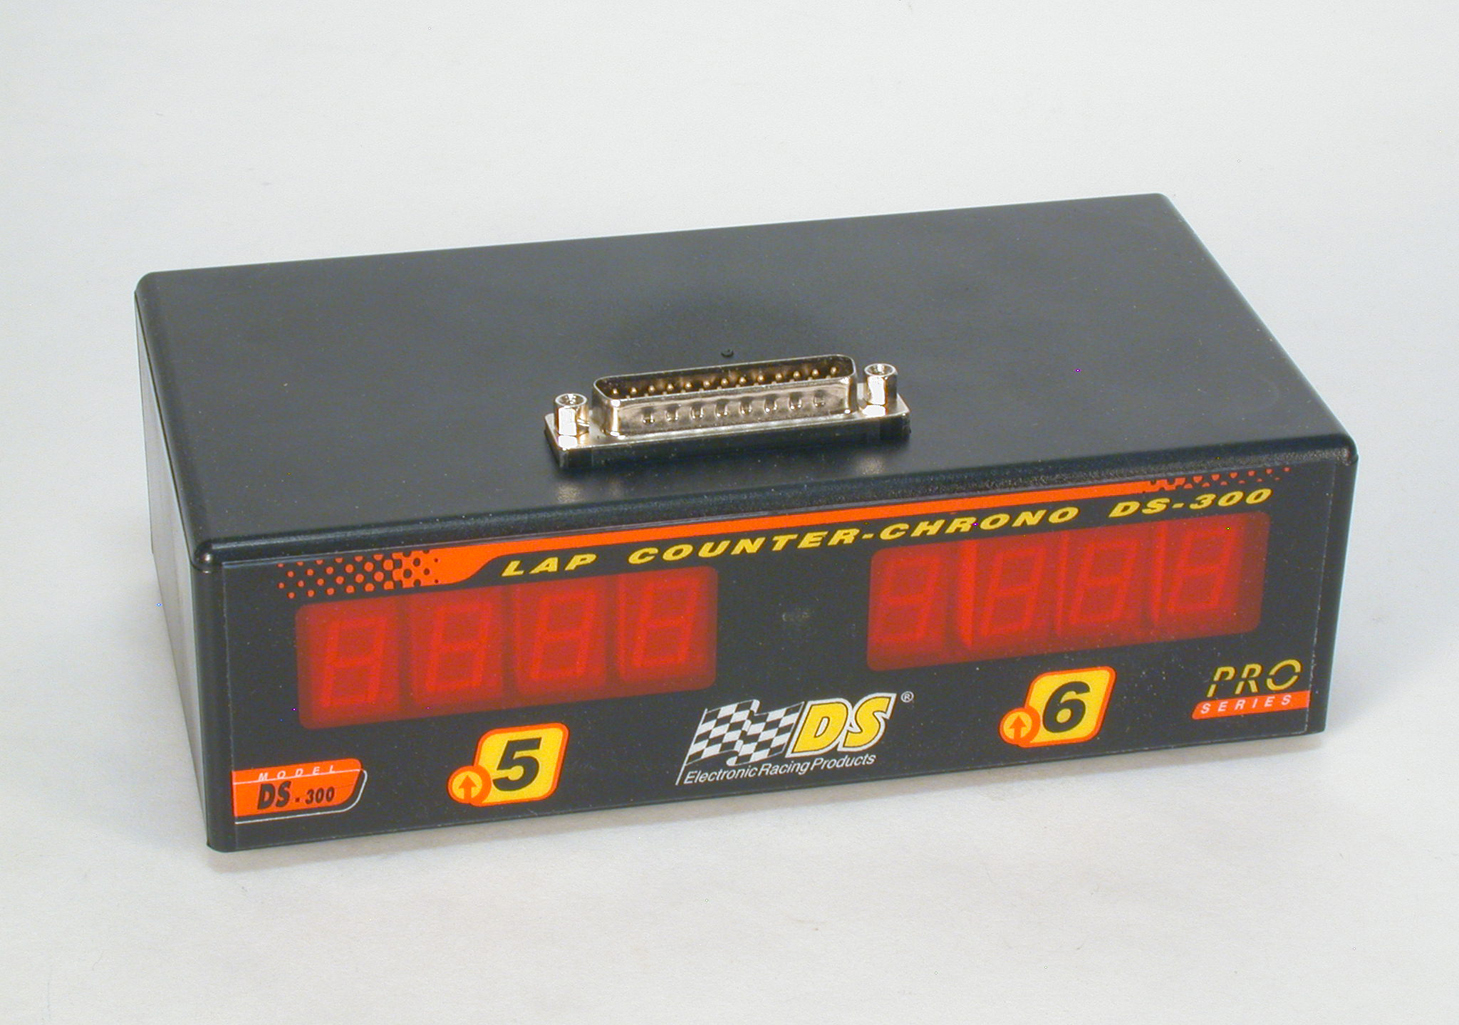 DS-356 Lap Counter - Module for Lanes 5 and 6